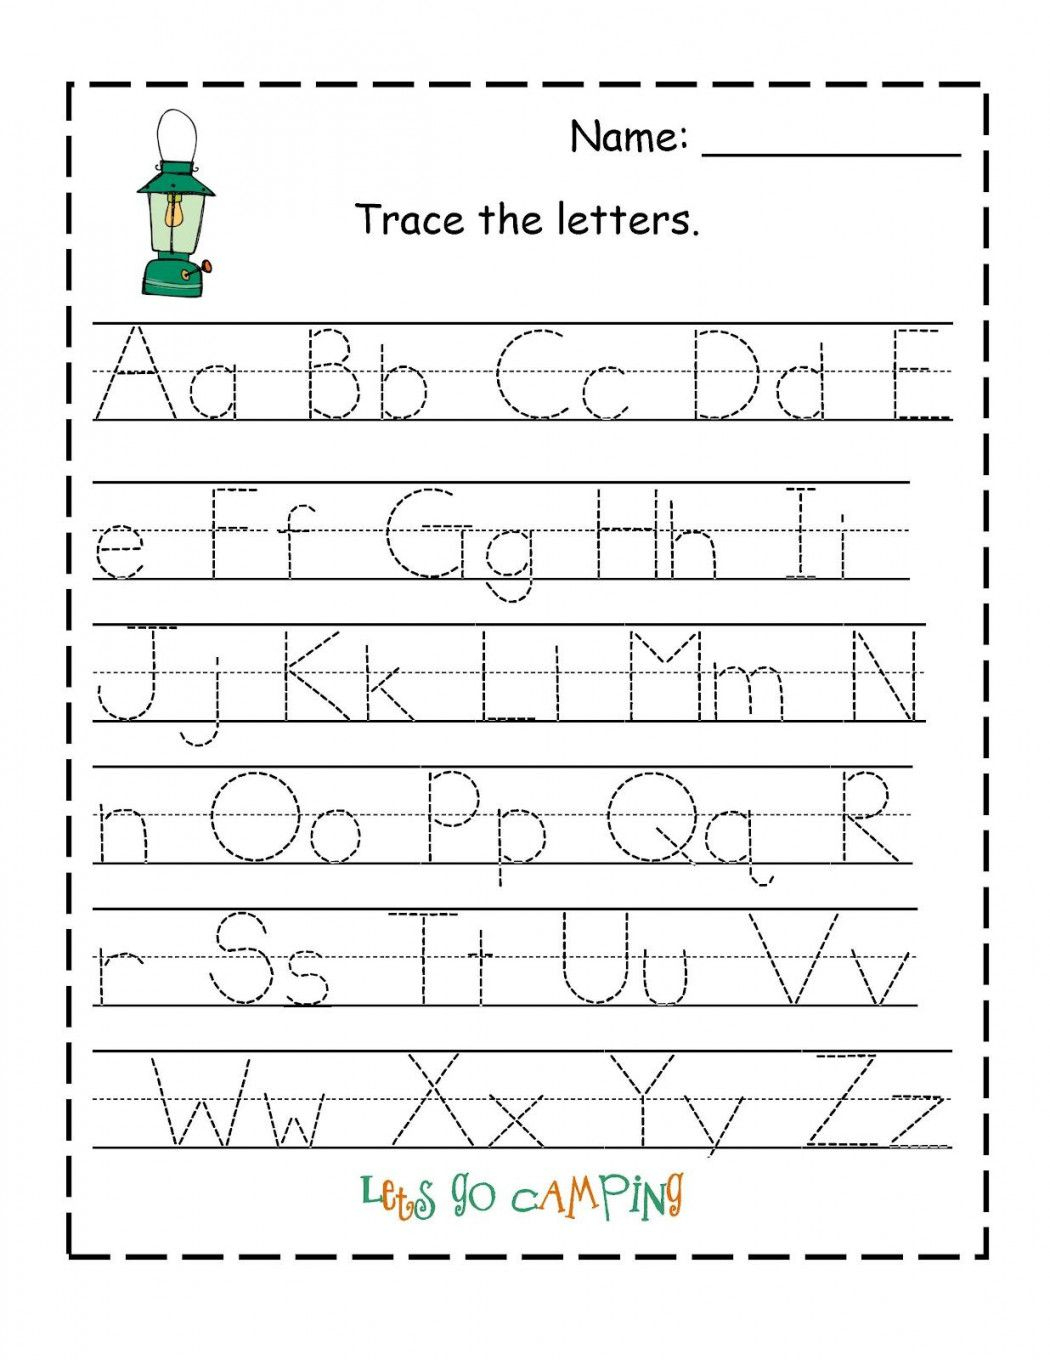 Free Alphabet Tracing Worksheets | Lostranquillos - Free Printable Alphabet Tracing Worksheets For Kindergarten